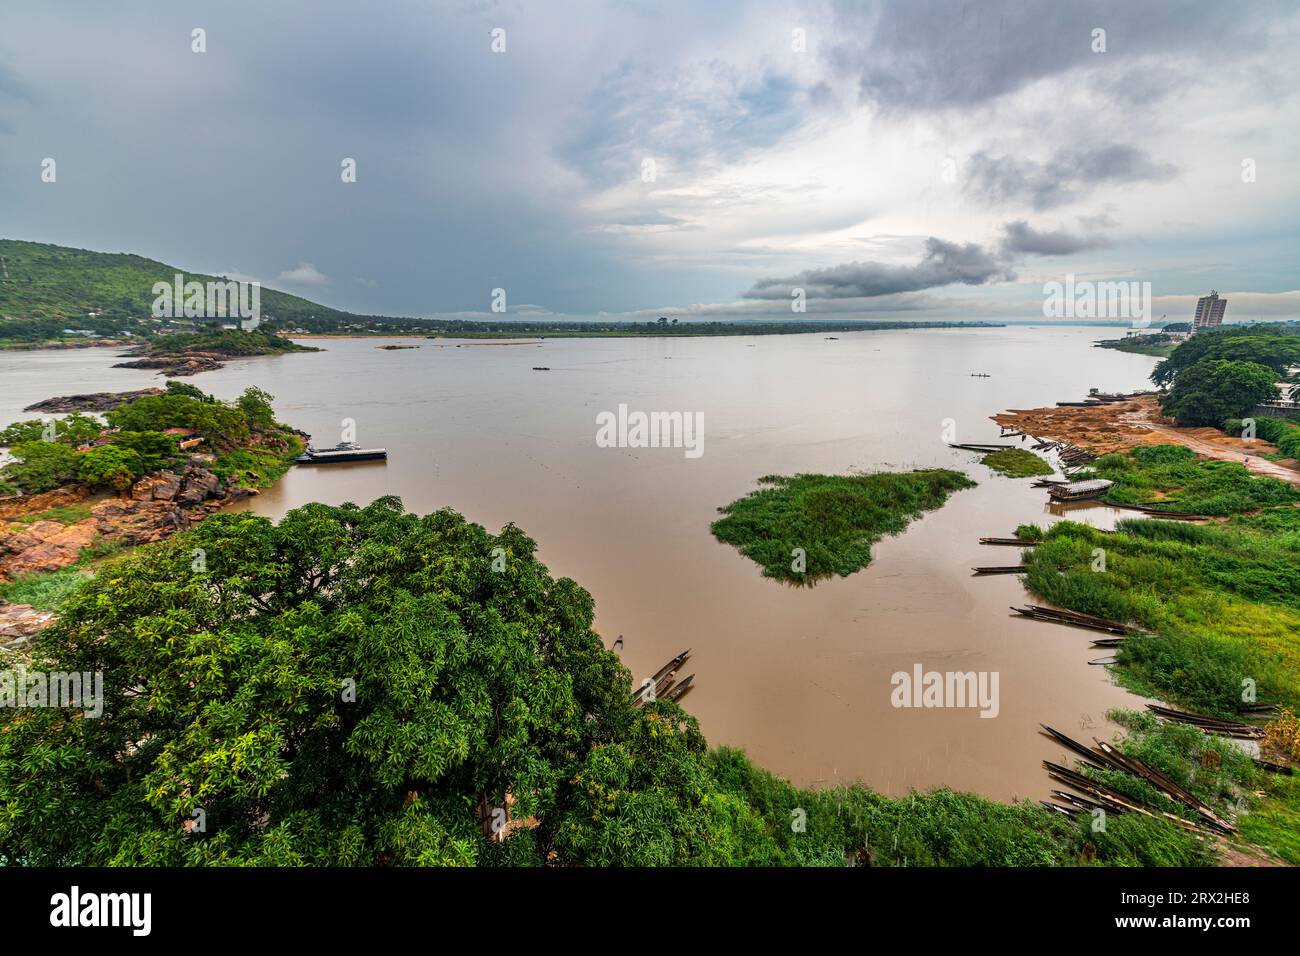 View over the Ubangi River, Bangui, Central African Republic, Africa Stock Photo